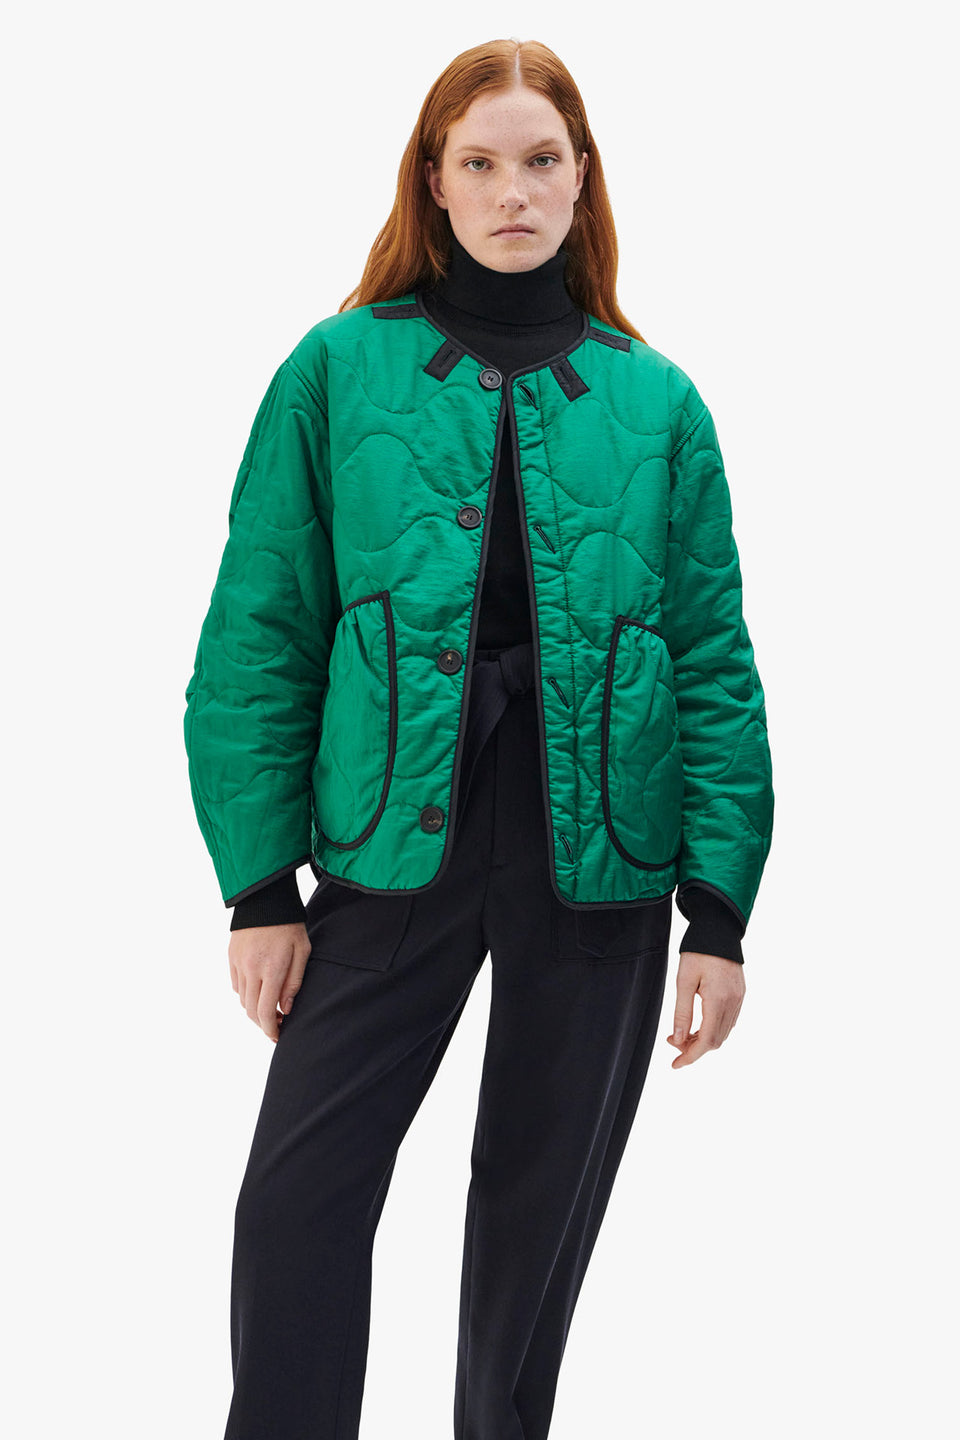 Patchwork Quilt Jacket - Navy / Emerald (listing page thumbnail)